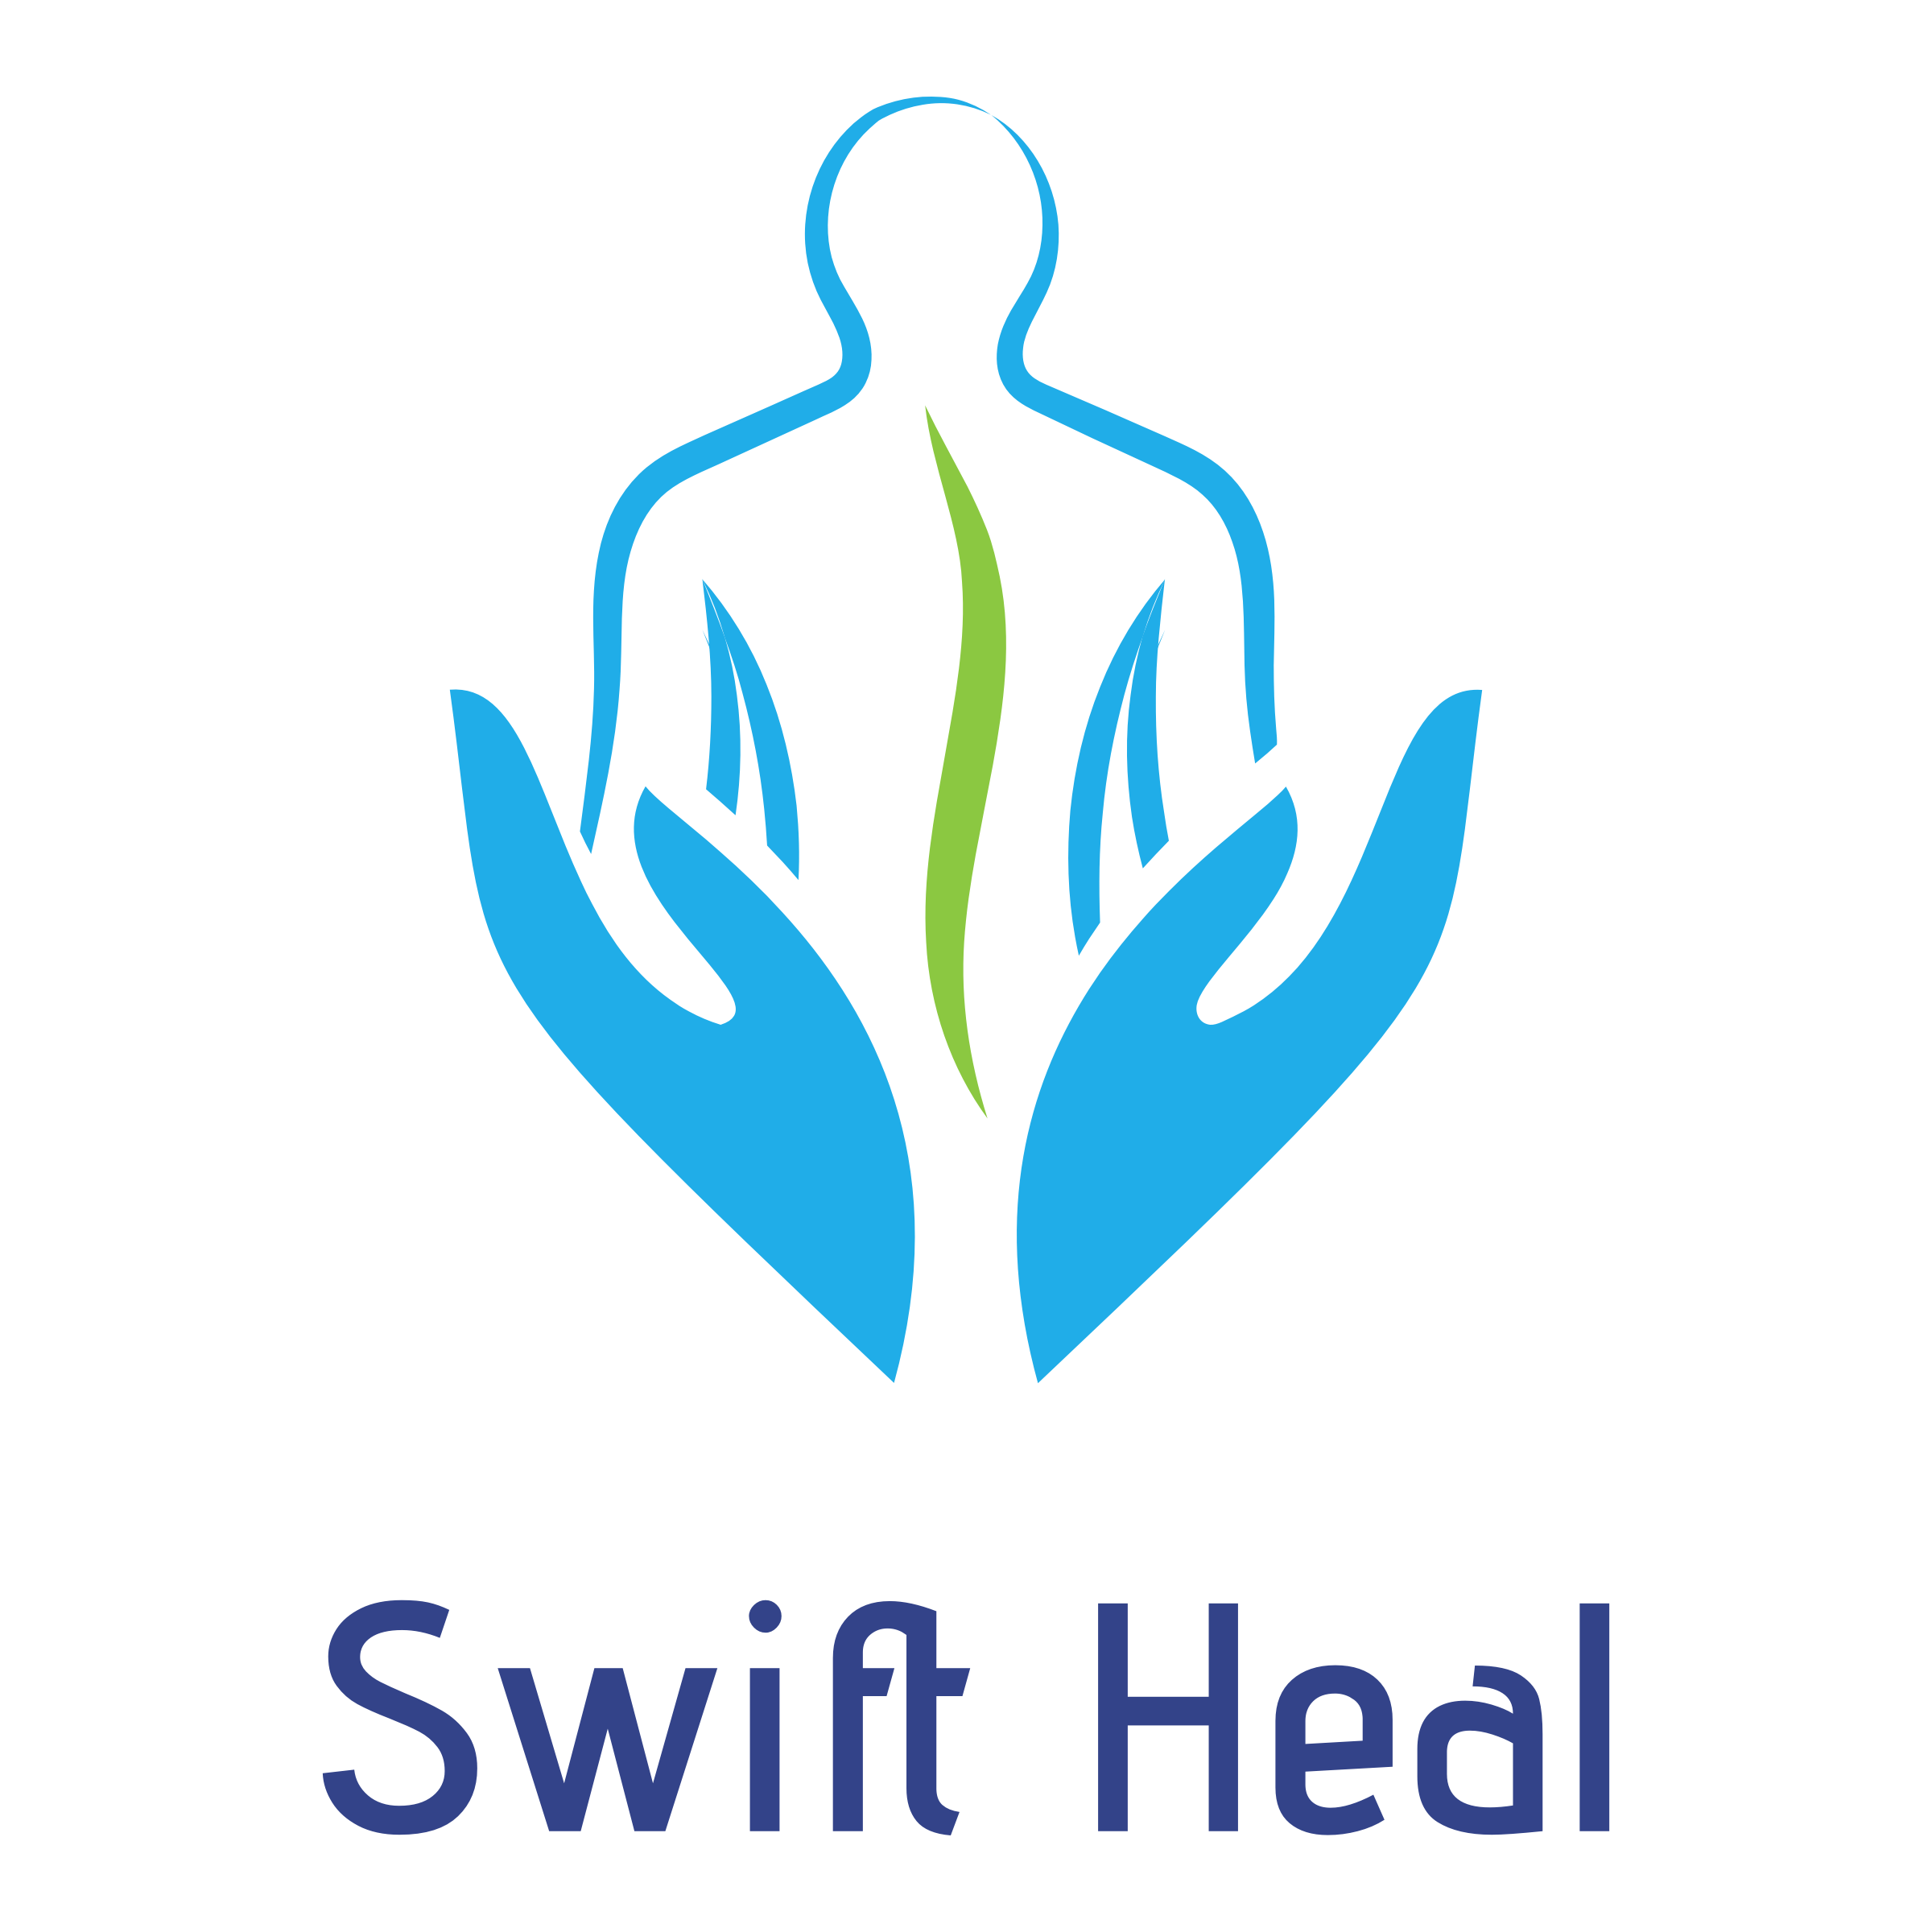 physiotherapy logo design